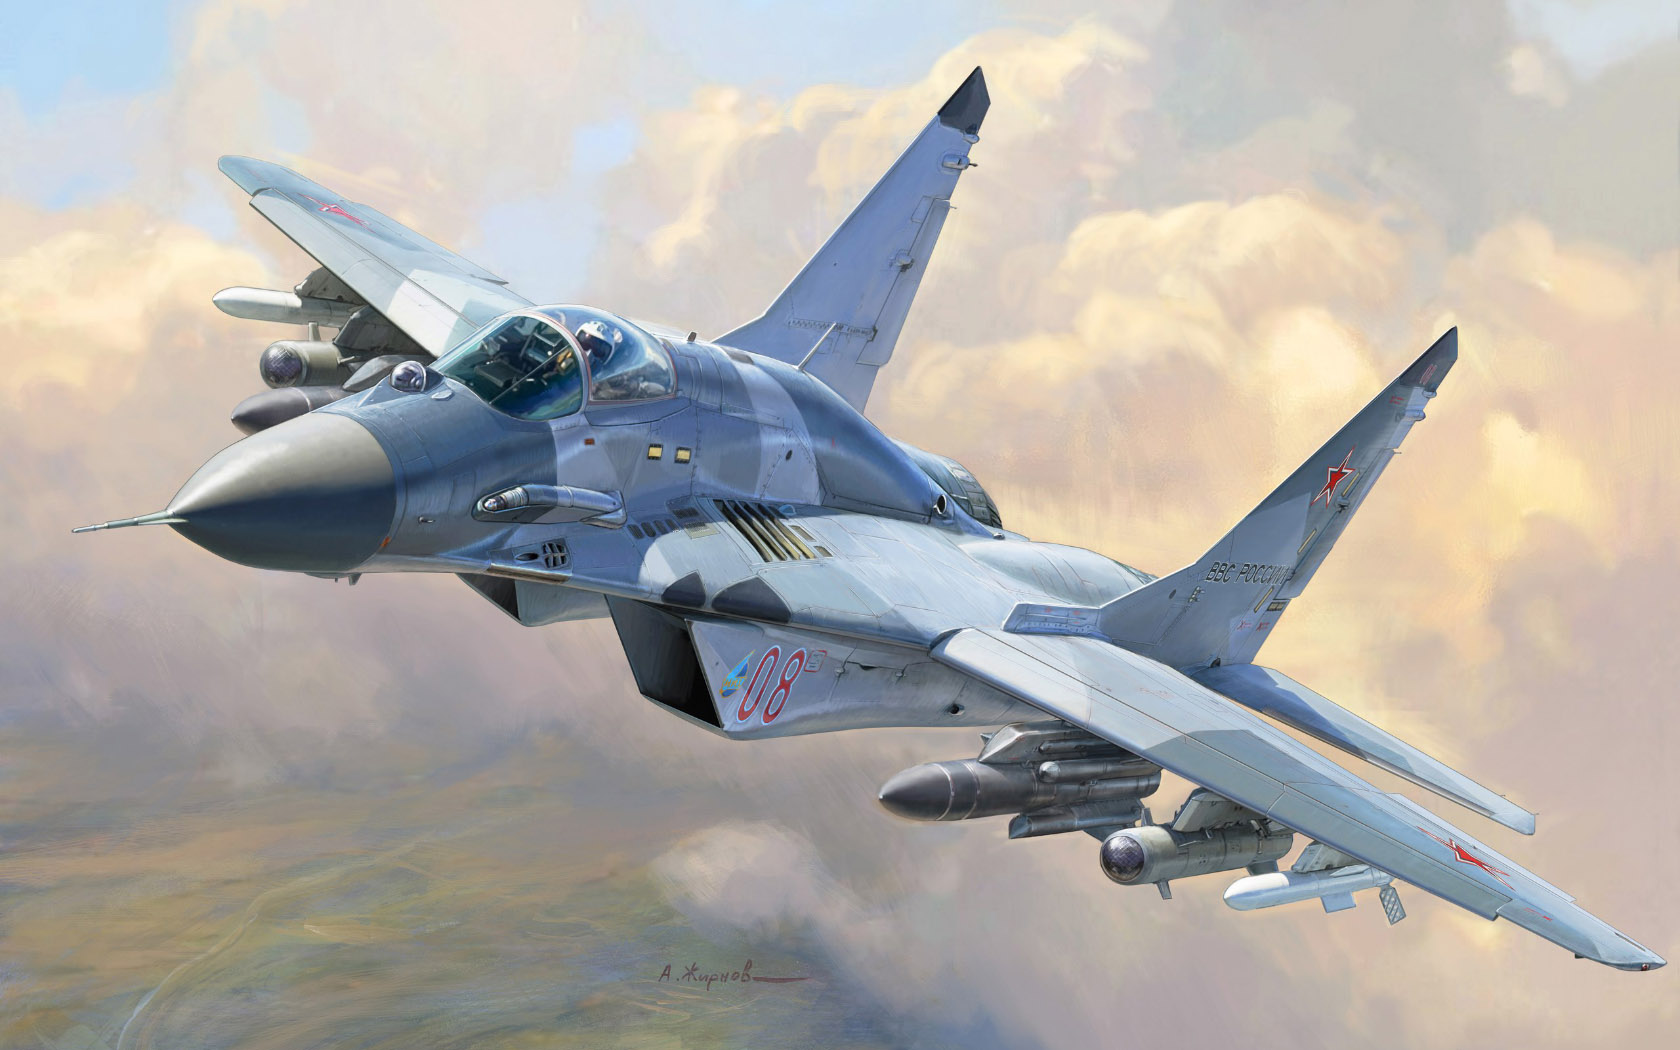 General 1680x1050 aircraft military Mikoyan MiG-29 sky clouds flying military vehicle artwork Russian Air Force Andrei Zhirnov Boxart missiles